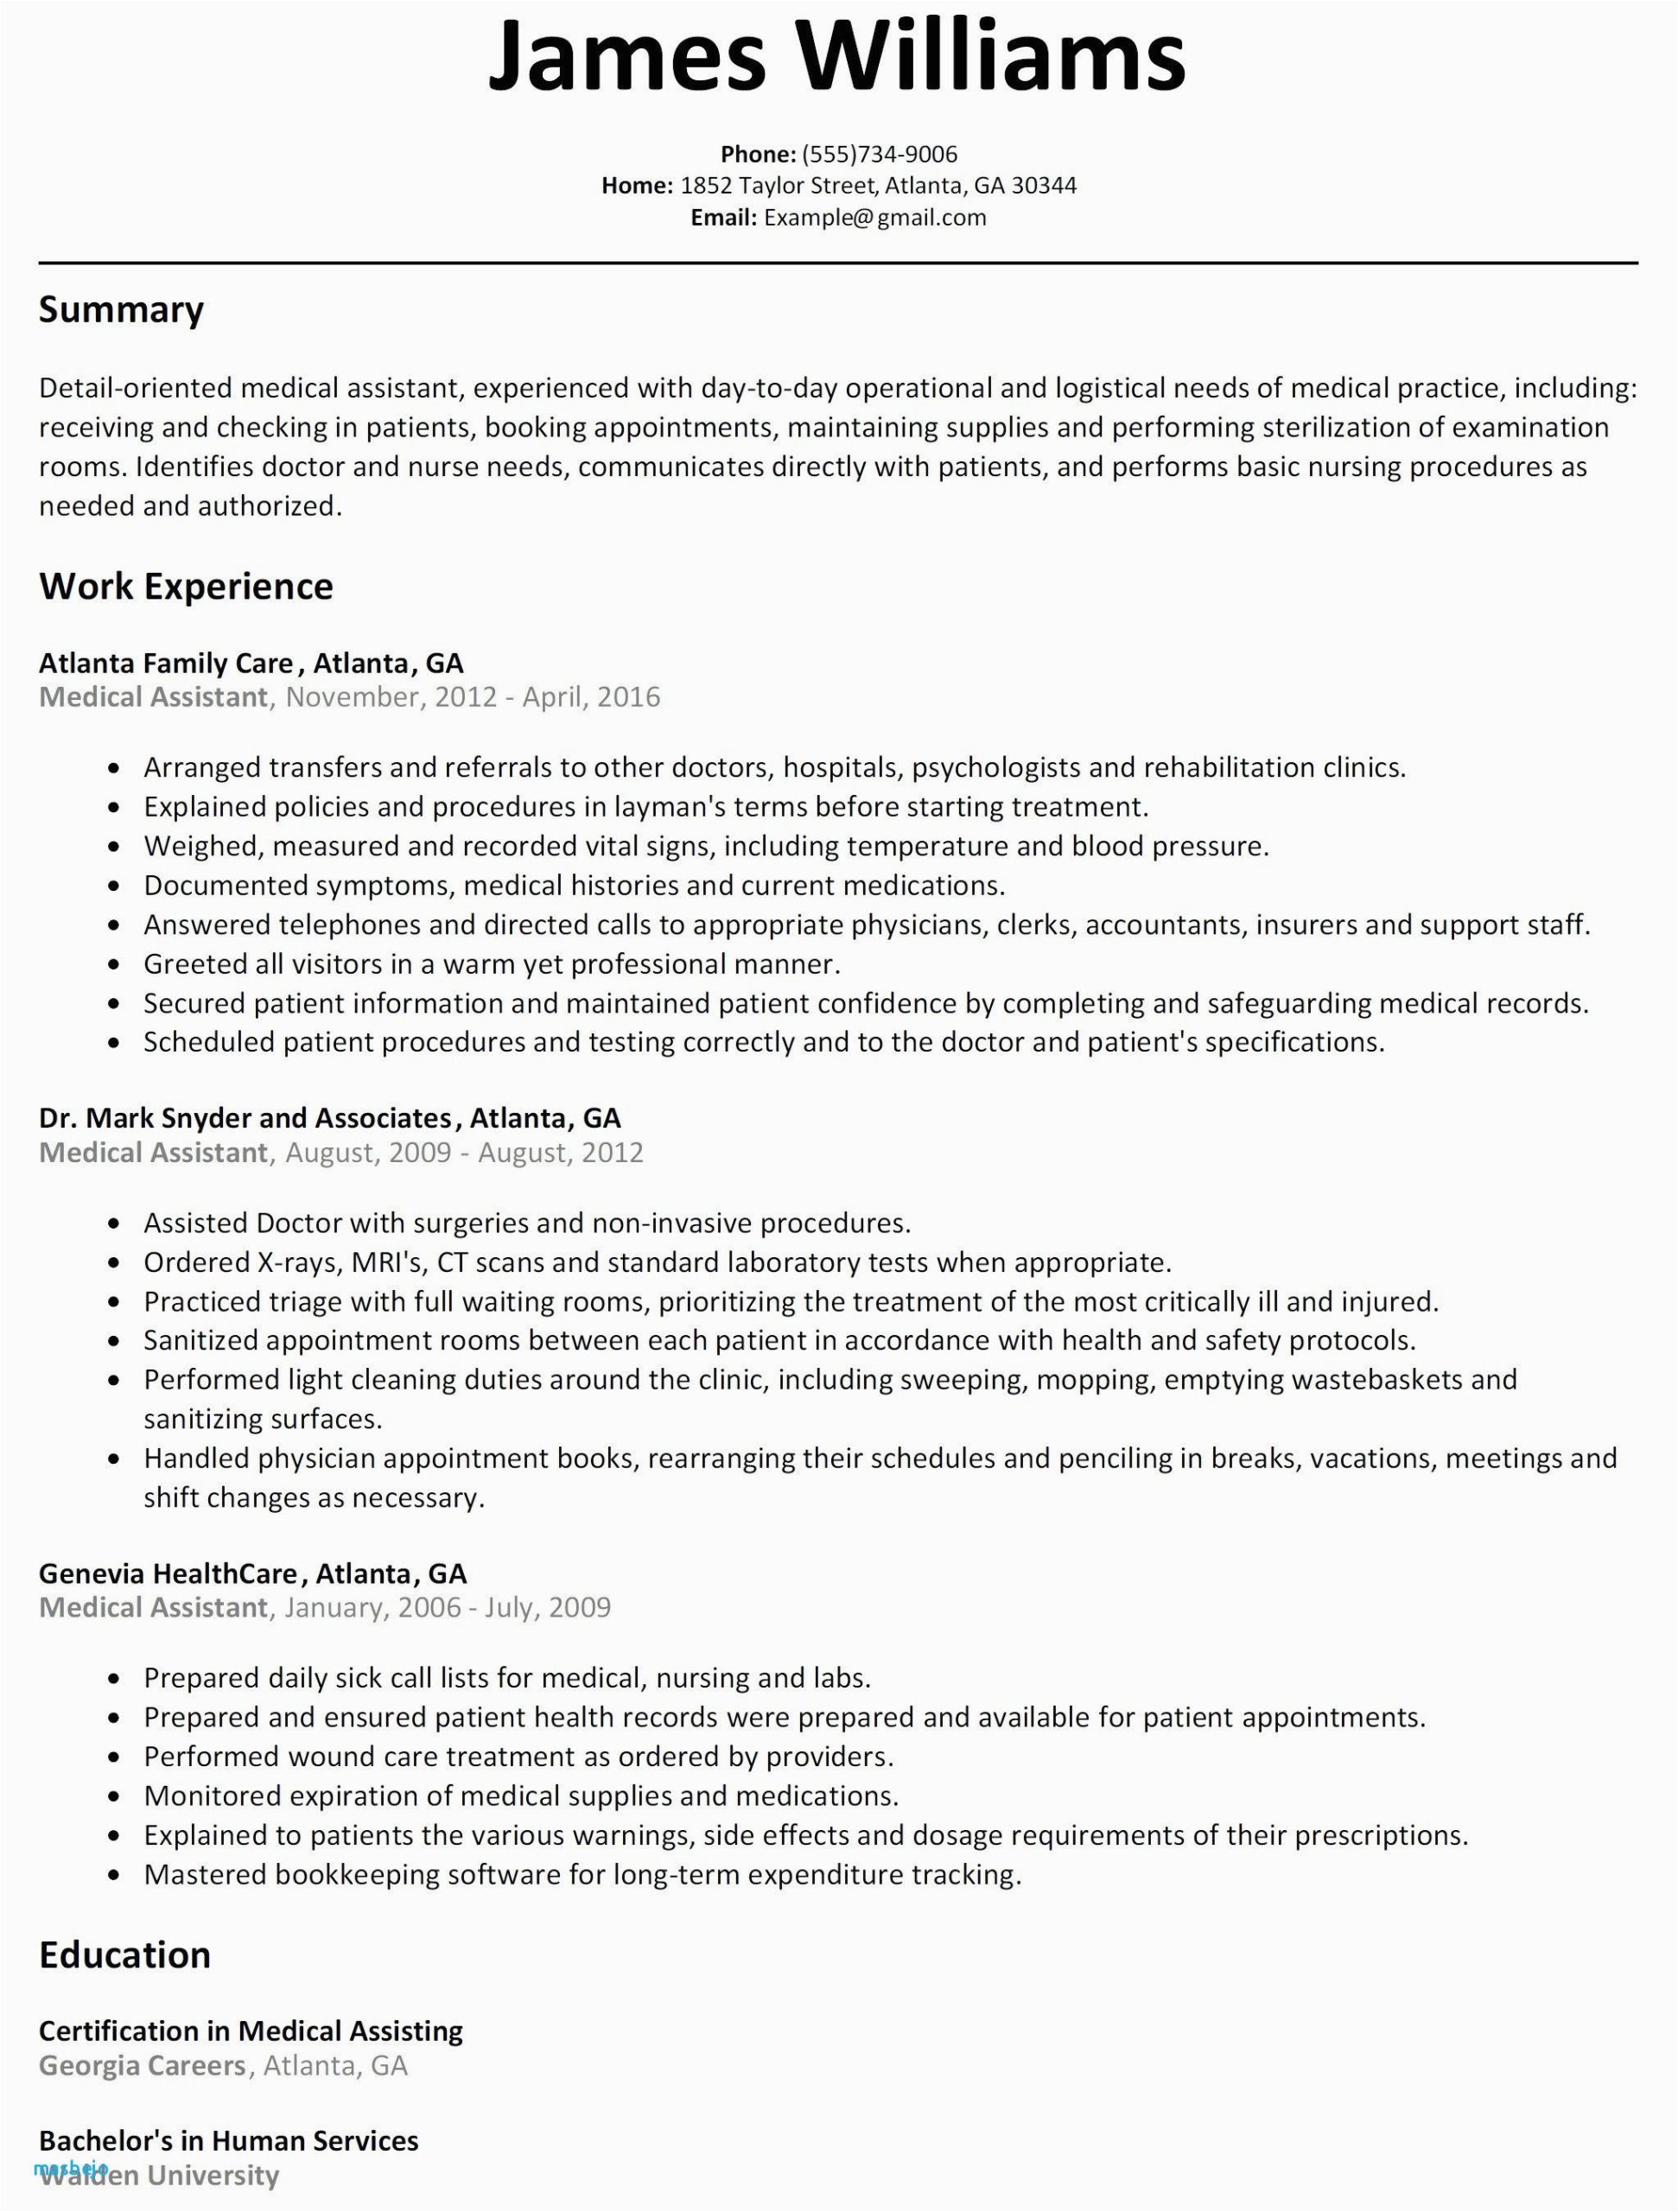 Sample Resume for Medical assistant Job with No Experience 68 Beautiful S Resume Examples for Medical assistant with No